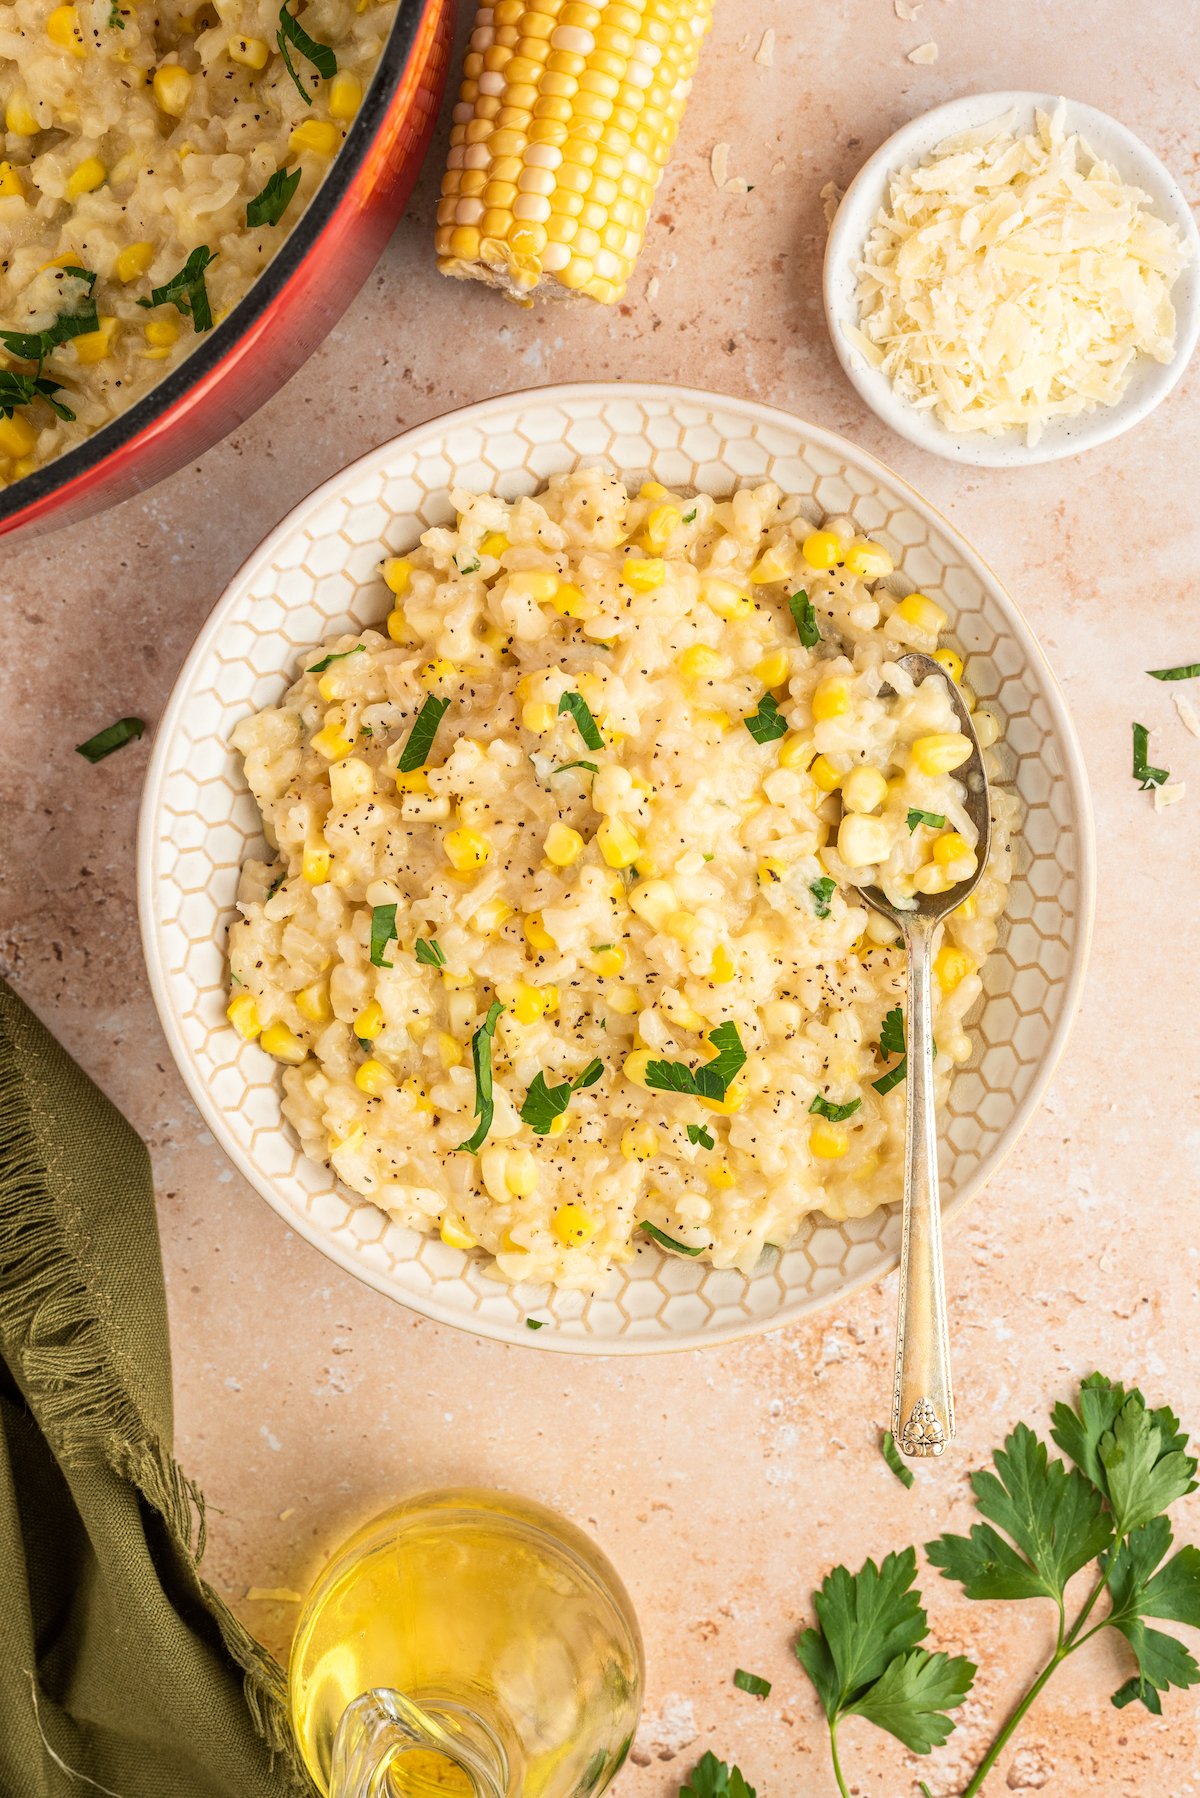 Sweet corn risotto on a serving plate.